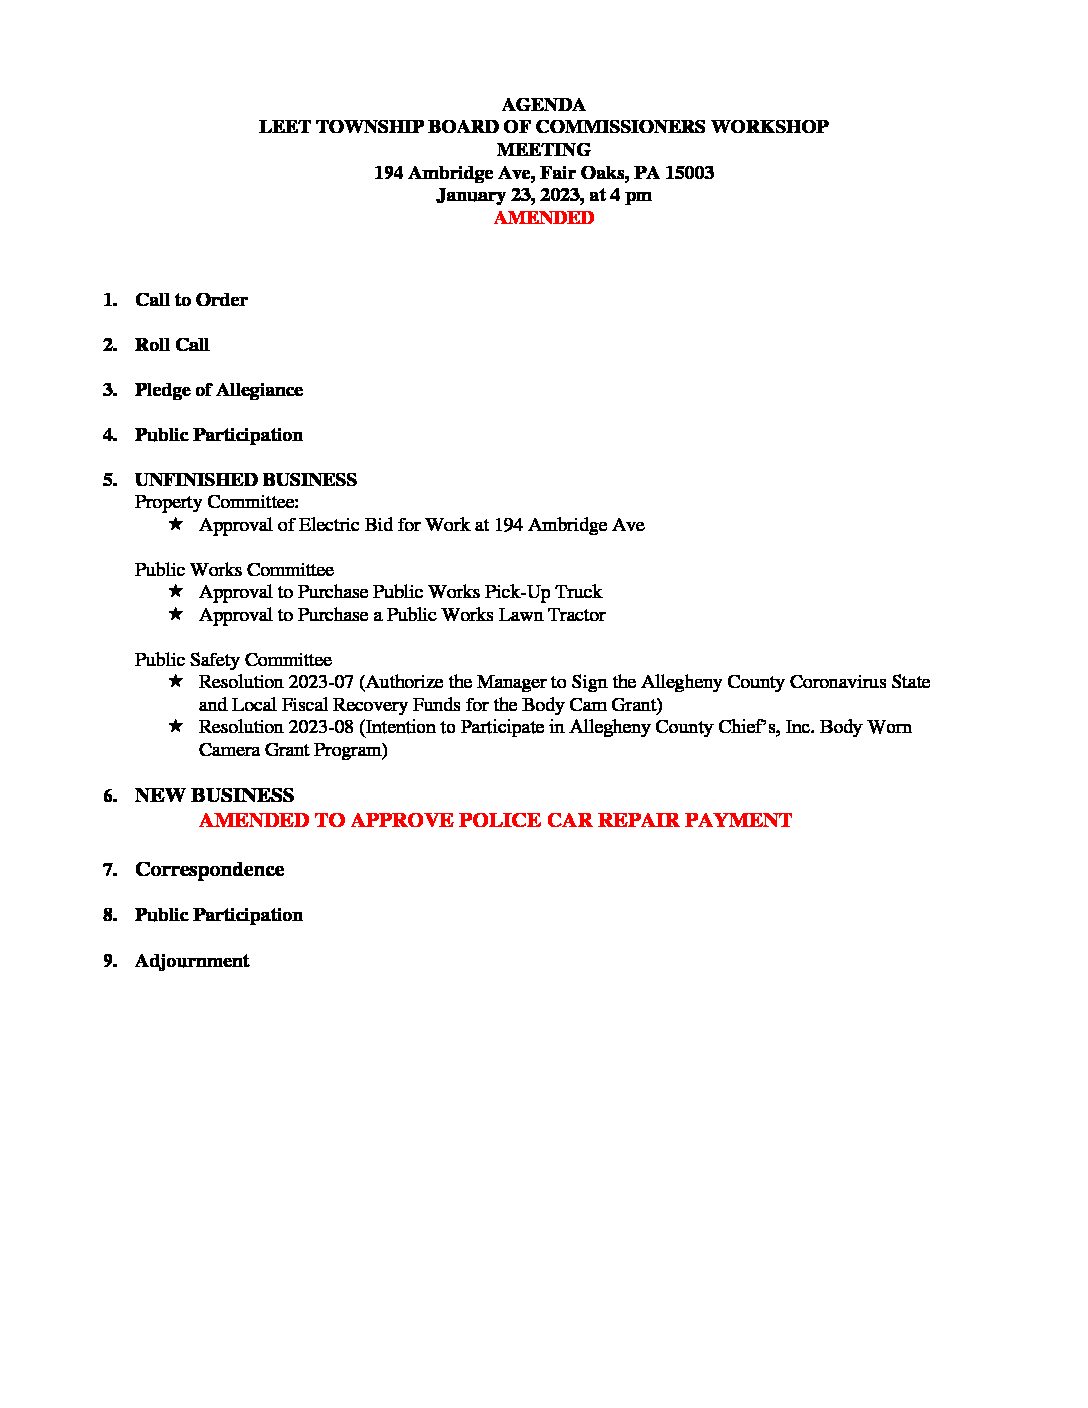 AGENDA January 23, 2023, Workshop Meeting Board of Commissioners